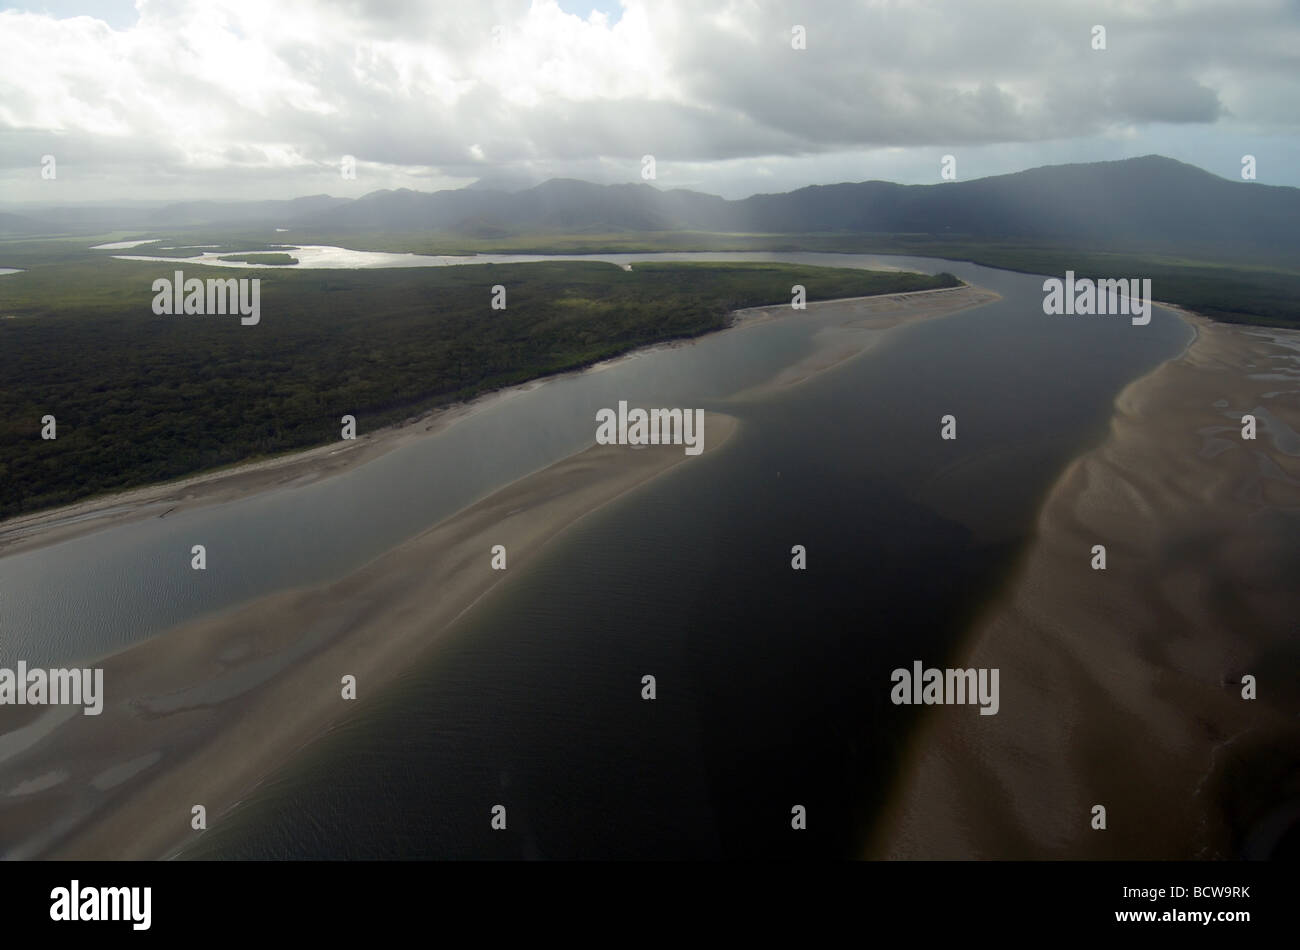 Daintree River mouth with sandbanks and clouds during the wet season, north Queensland, Australia Stock Photo